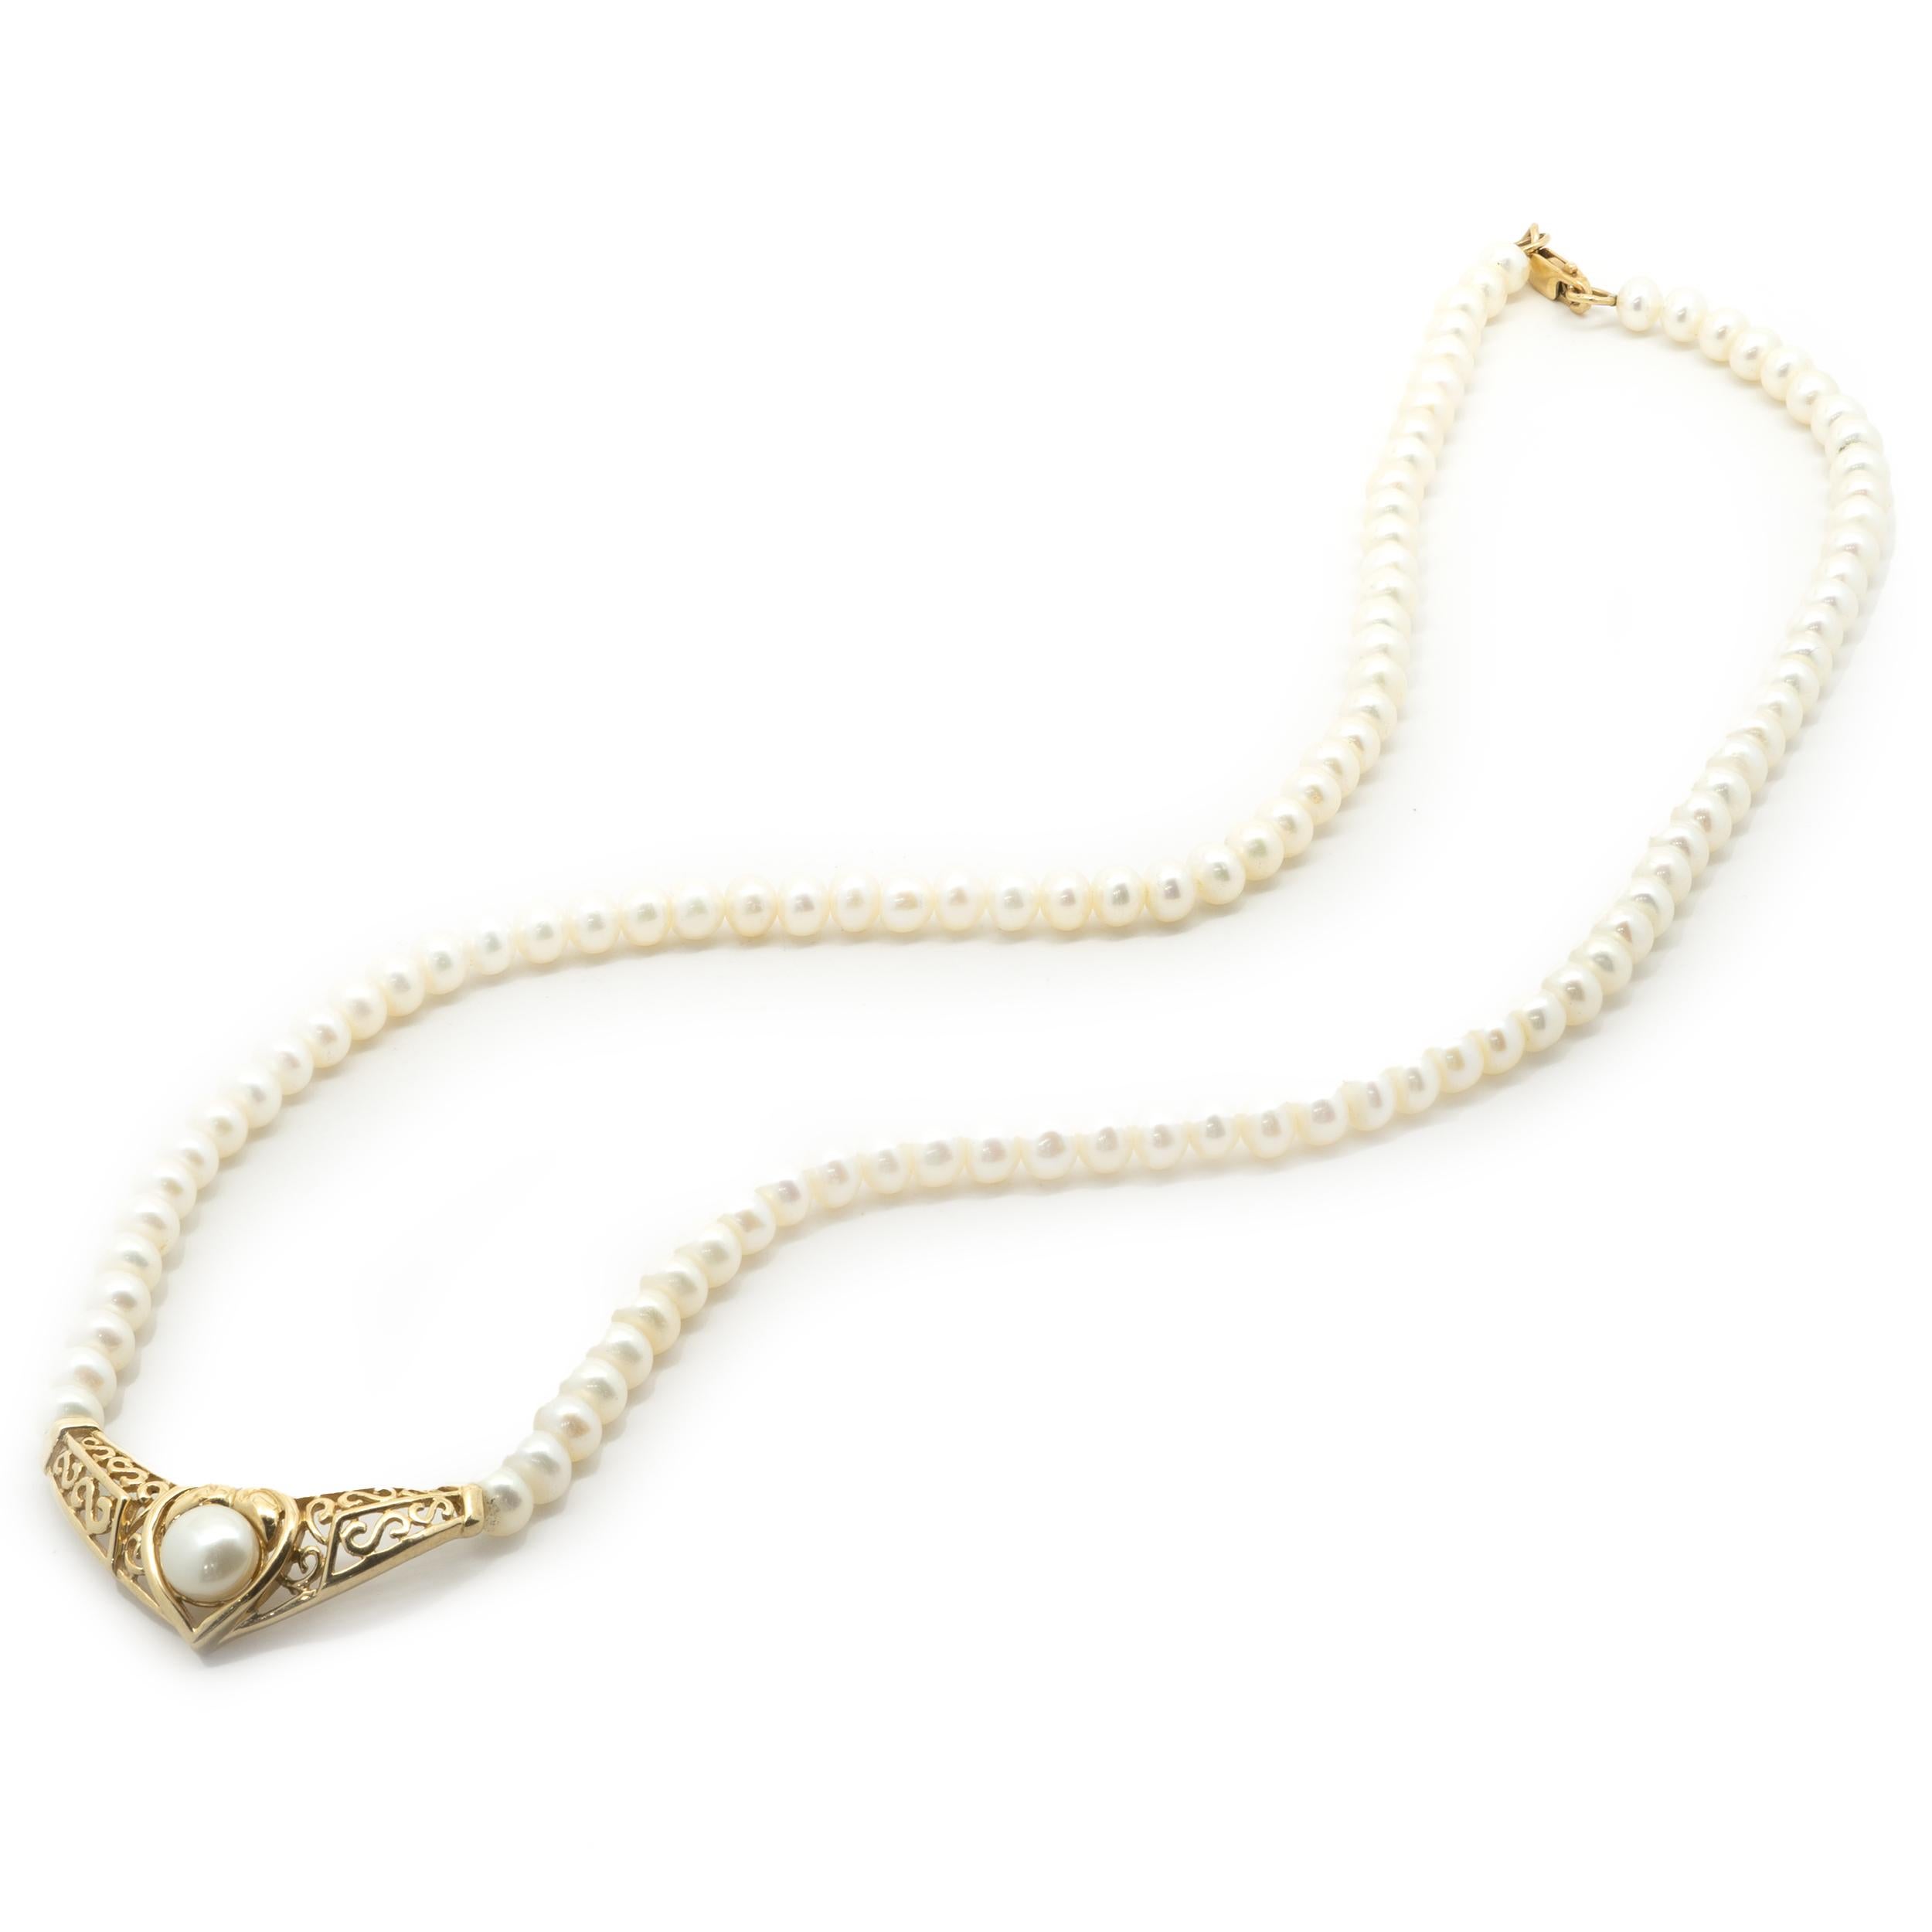 Designer: Custom
Material: 10K yellow gold
Pearl: potato pearl = 4.60 +/- mm
Dimensions: necklace measures 16-inches in length
Weight: 14.21 grams
